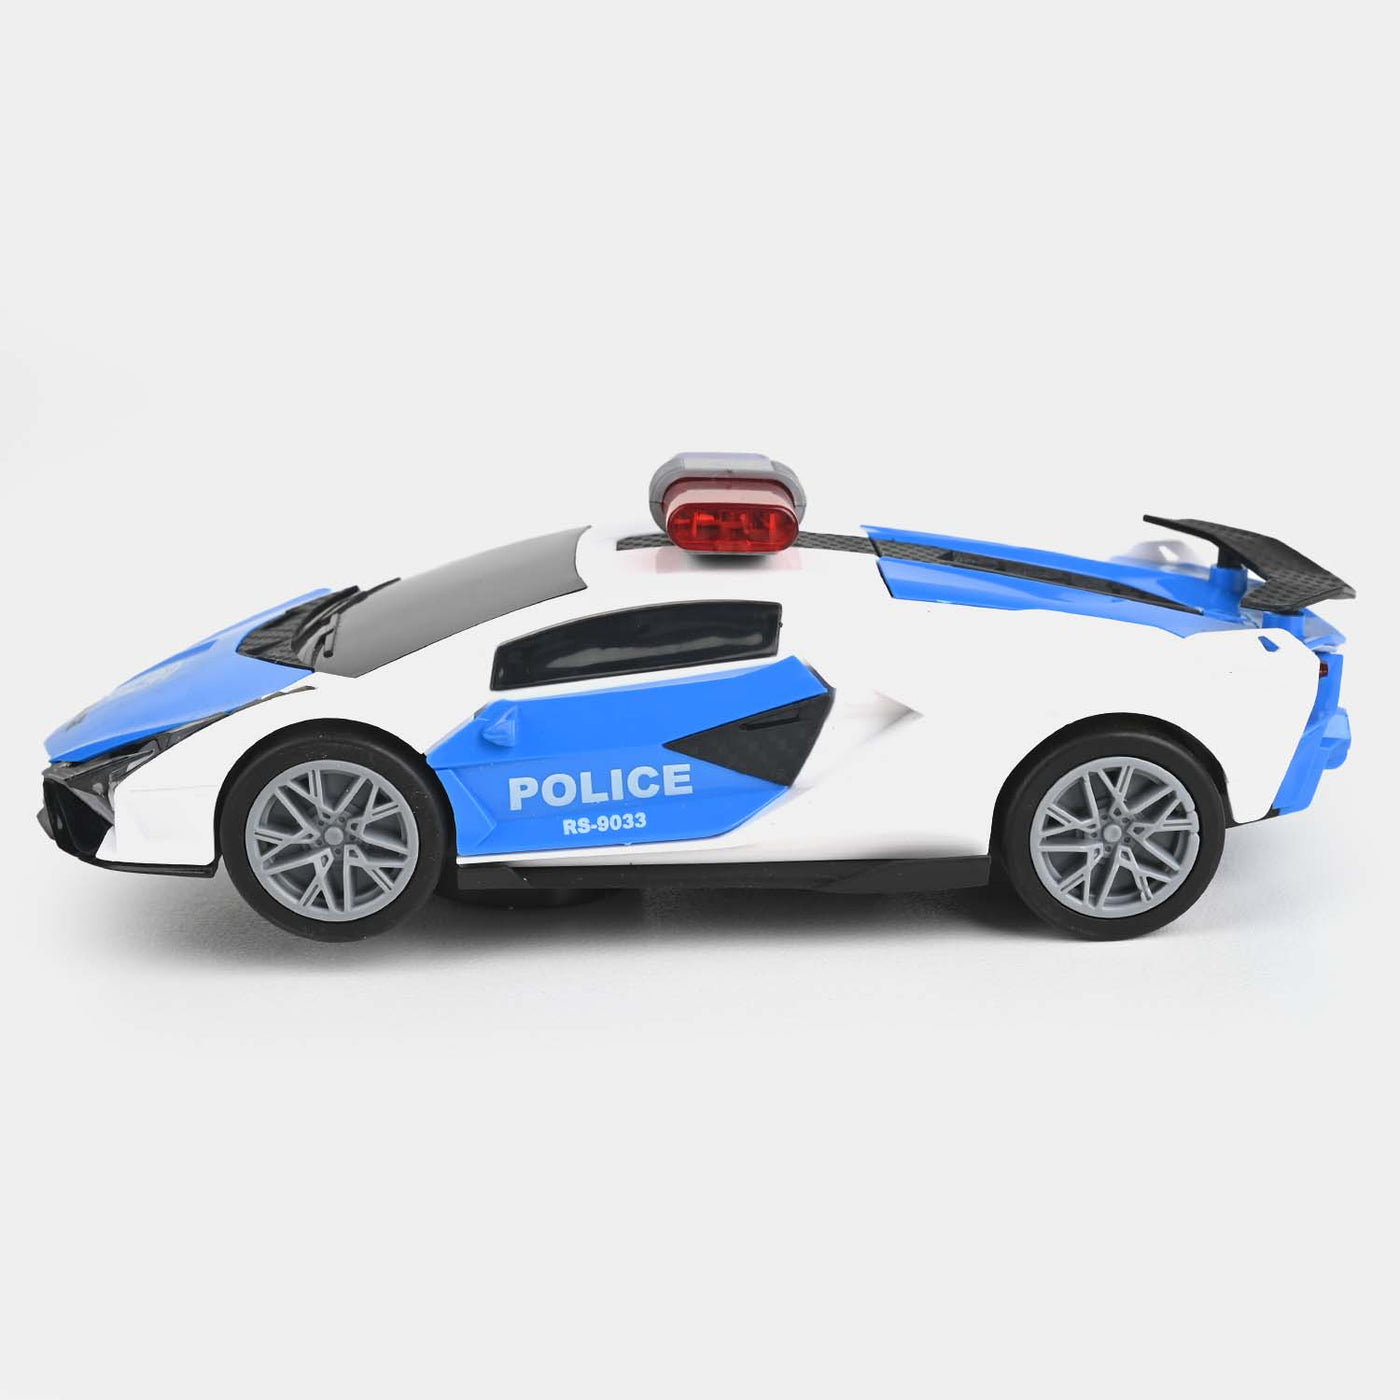 Electric Light & Musical Police Car Toy